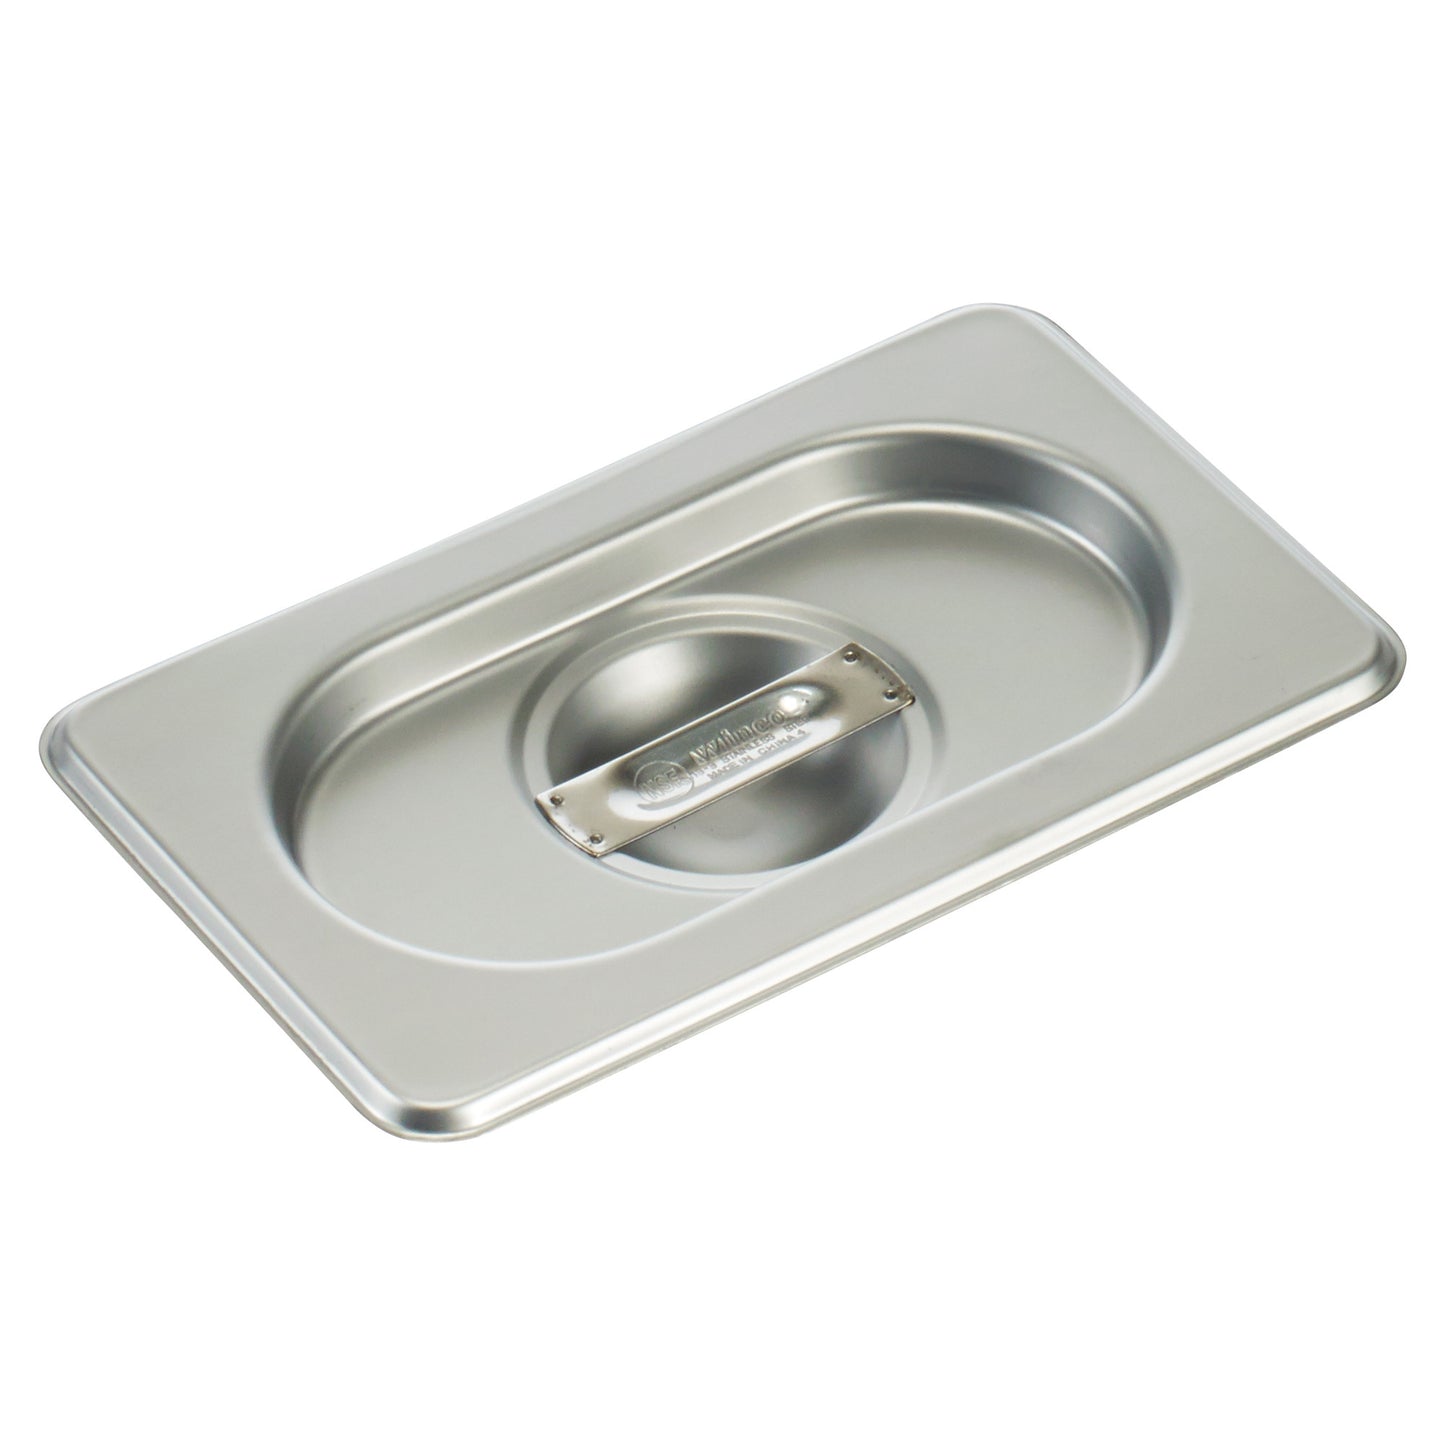 SPSCN-GN - Stainless Steel Gastronome 1/9th Steam Pan Cover for SPJH-906GN, Solid